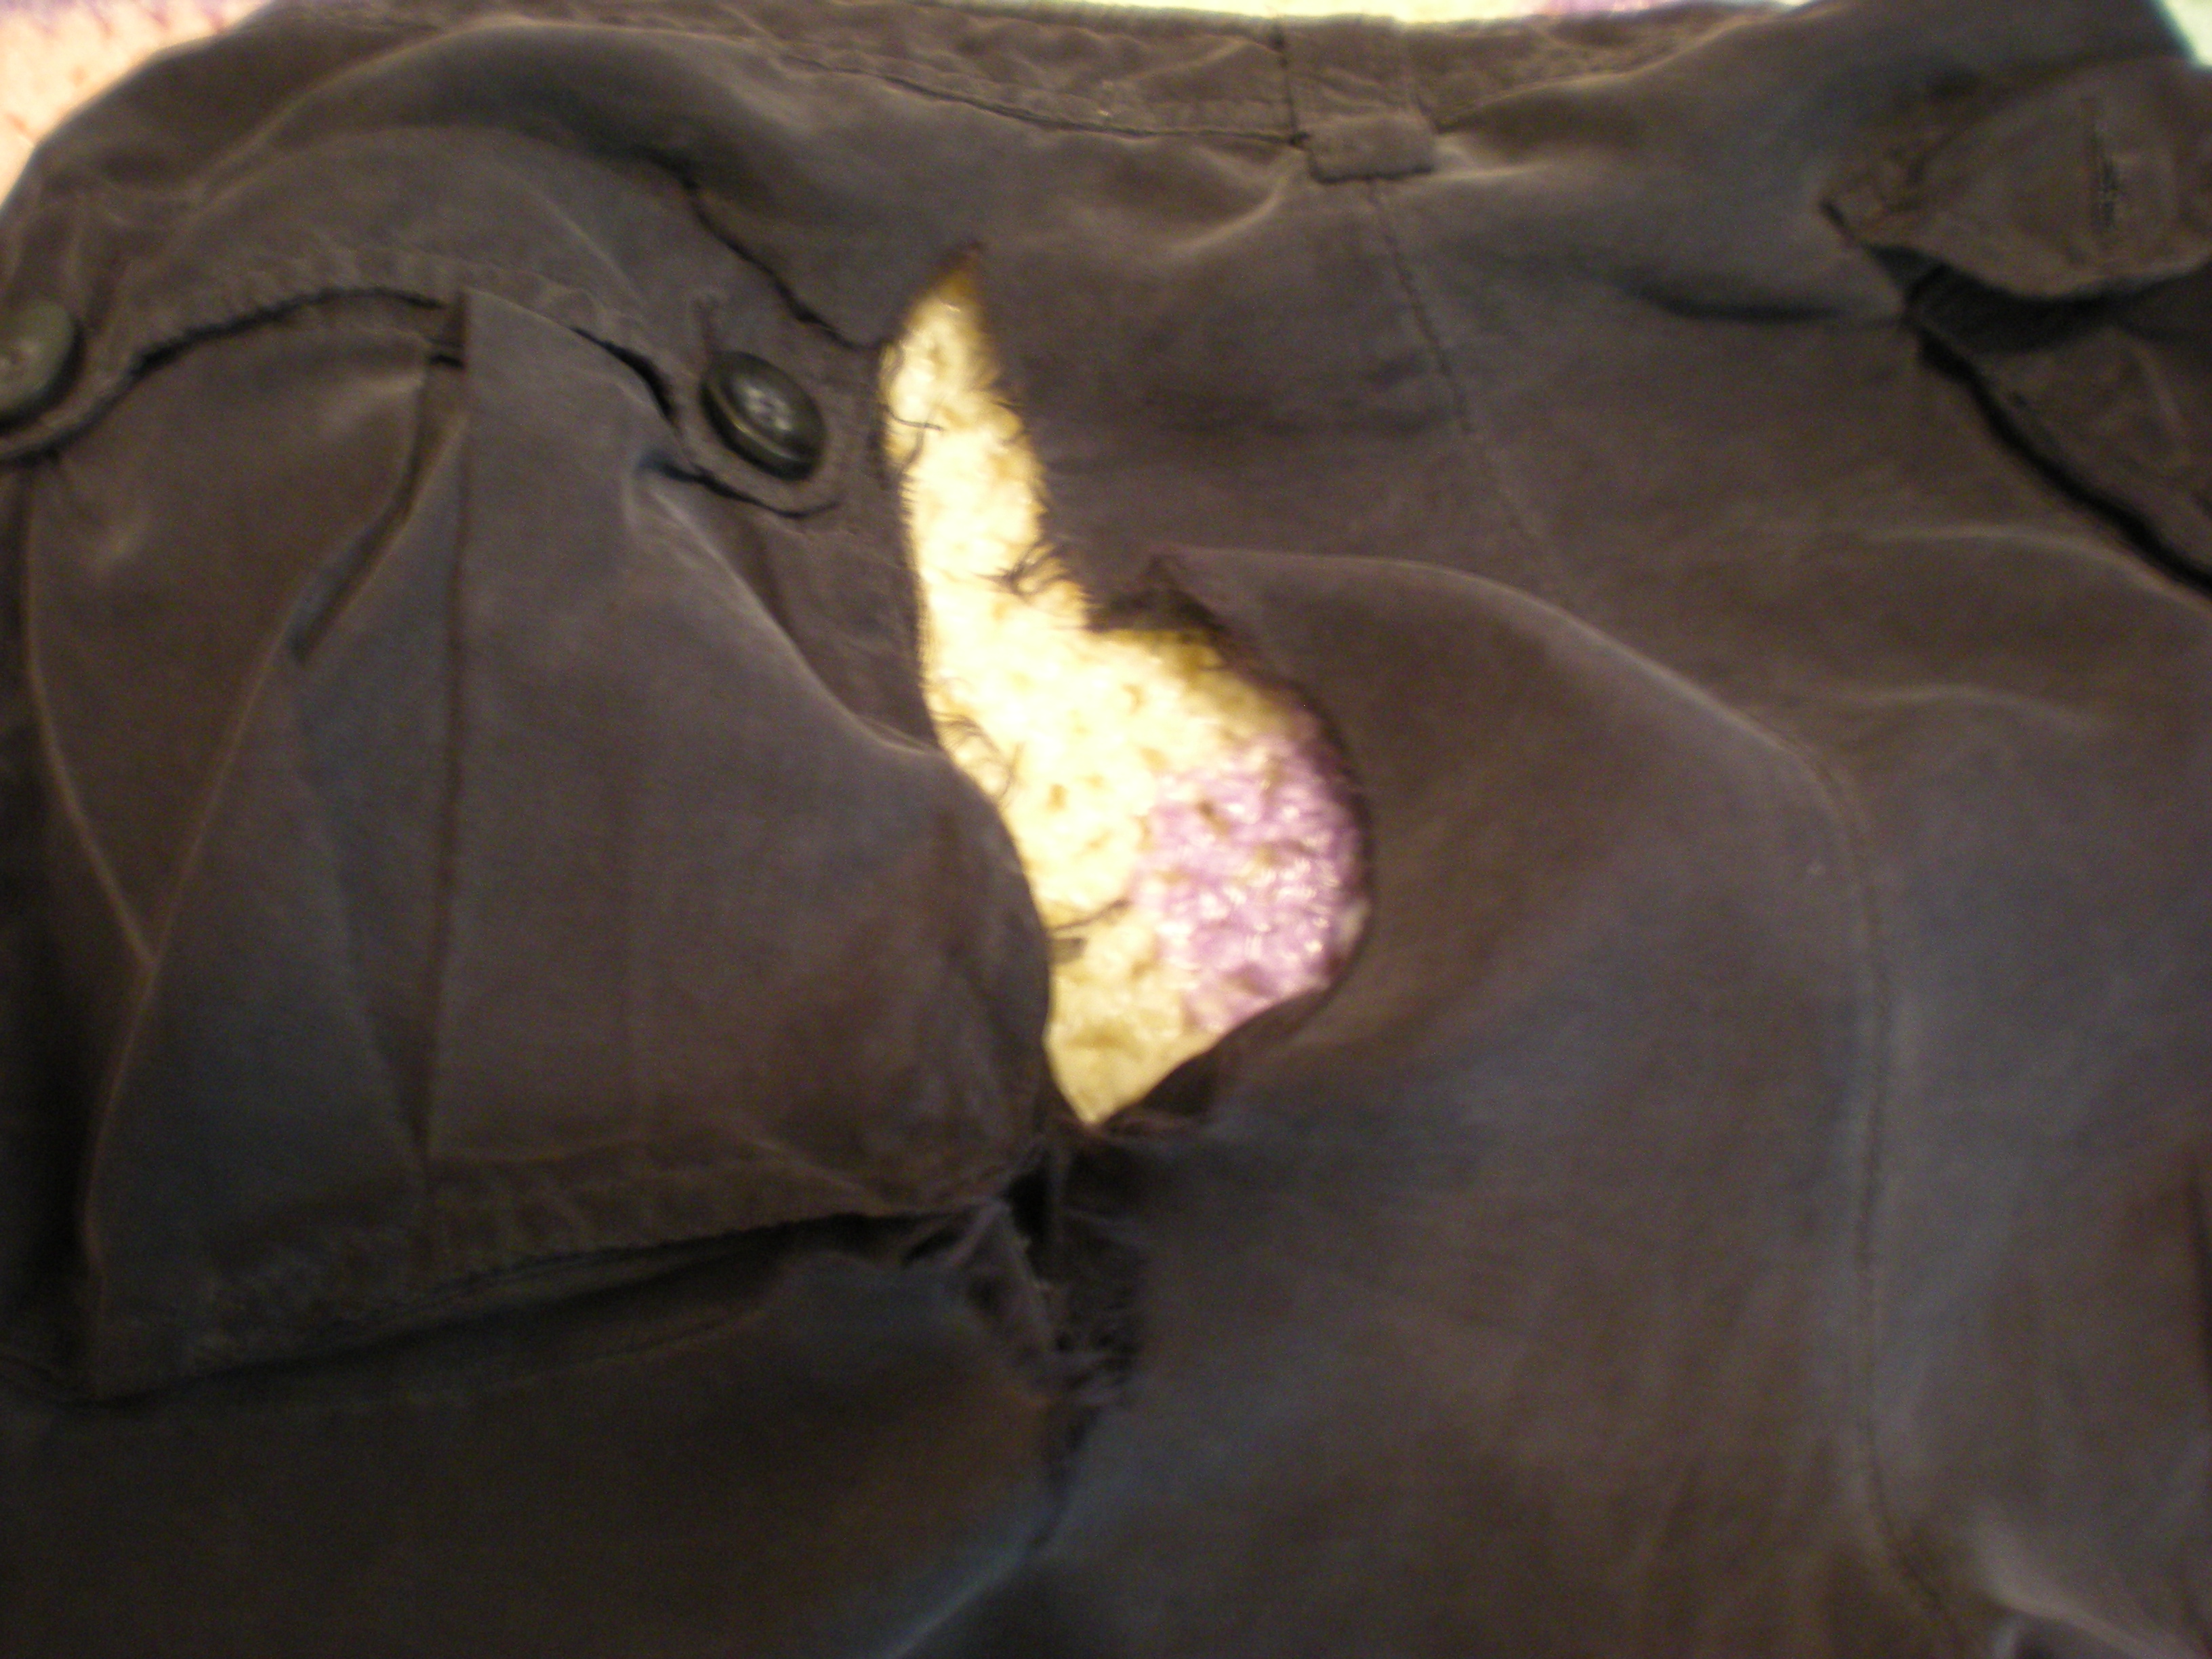 A hole in the pants